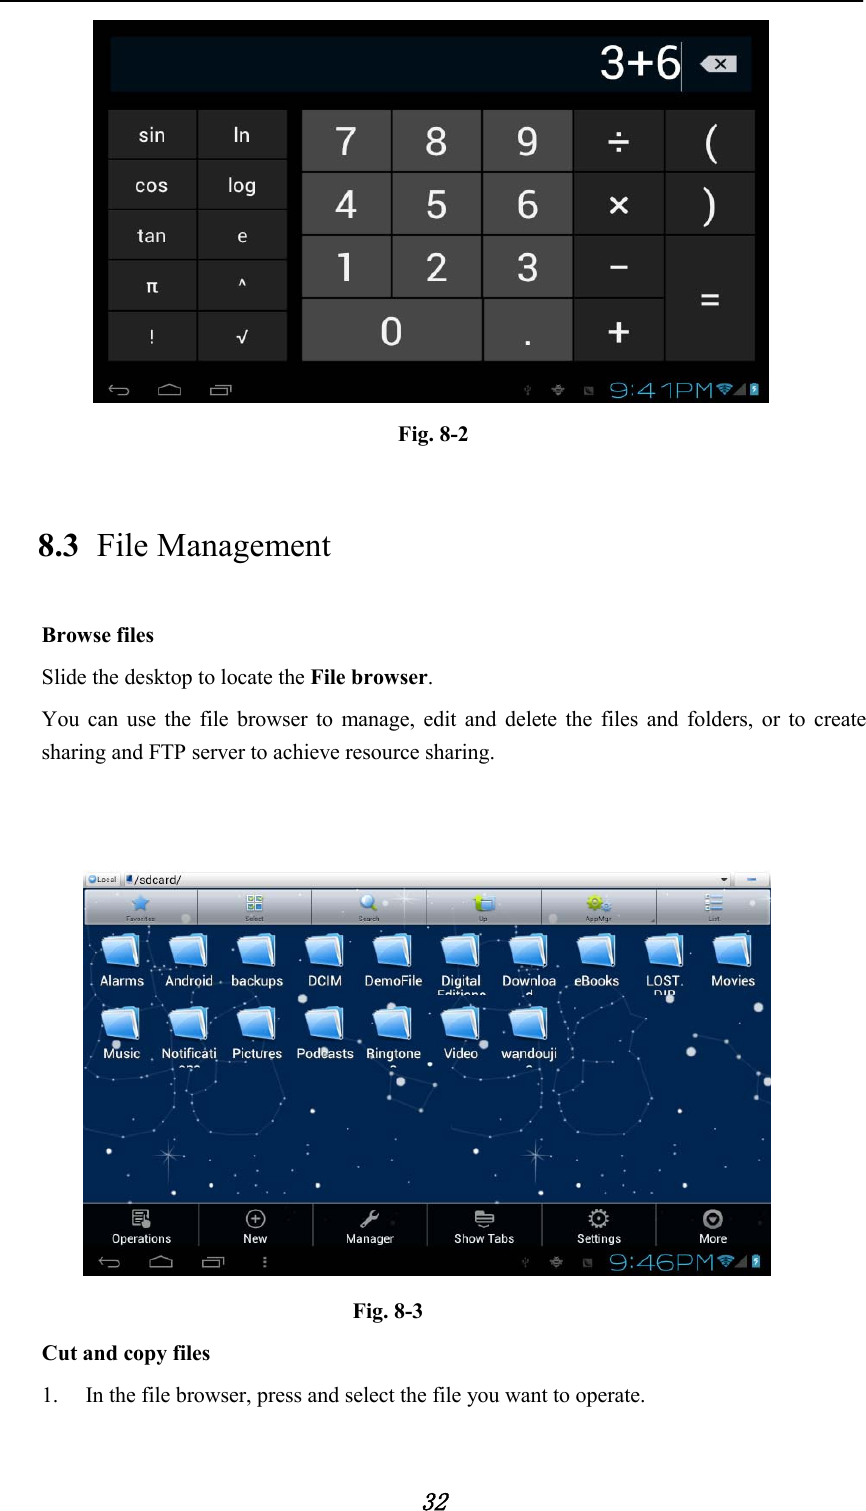            32  Fig. 8-2 8.3 File Management Browse files Slide the desktop to locate the File browser. You can use the file browser to manage, edit and delete the files and folders, or to create sharing and FTP server to achieve resource sharing.    Fig. 8-3 Cut and copy files 1. In the file browser, press and select the file you want to operate. 